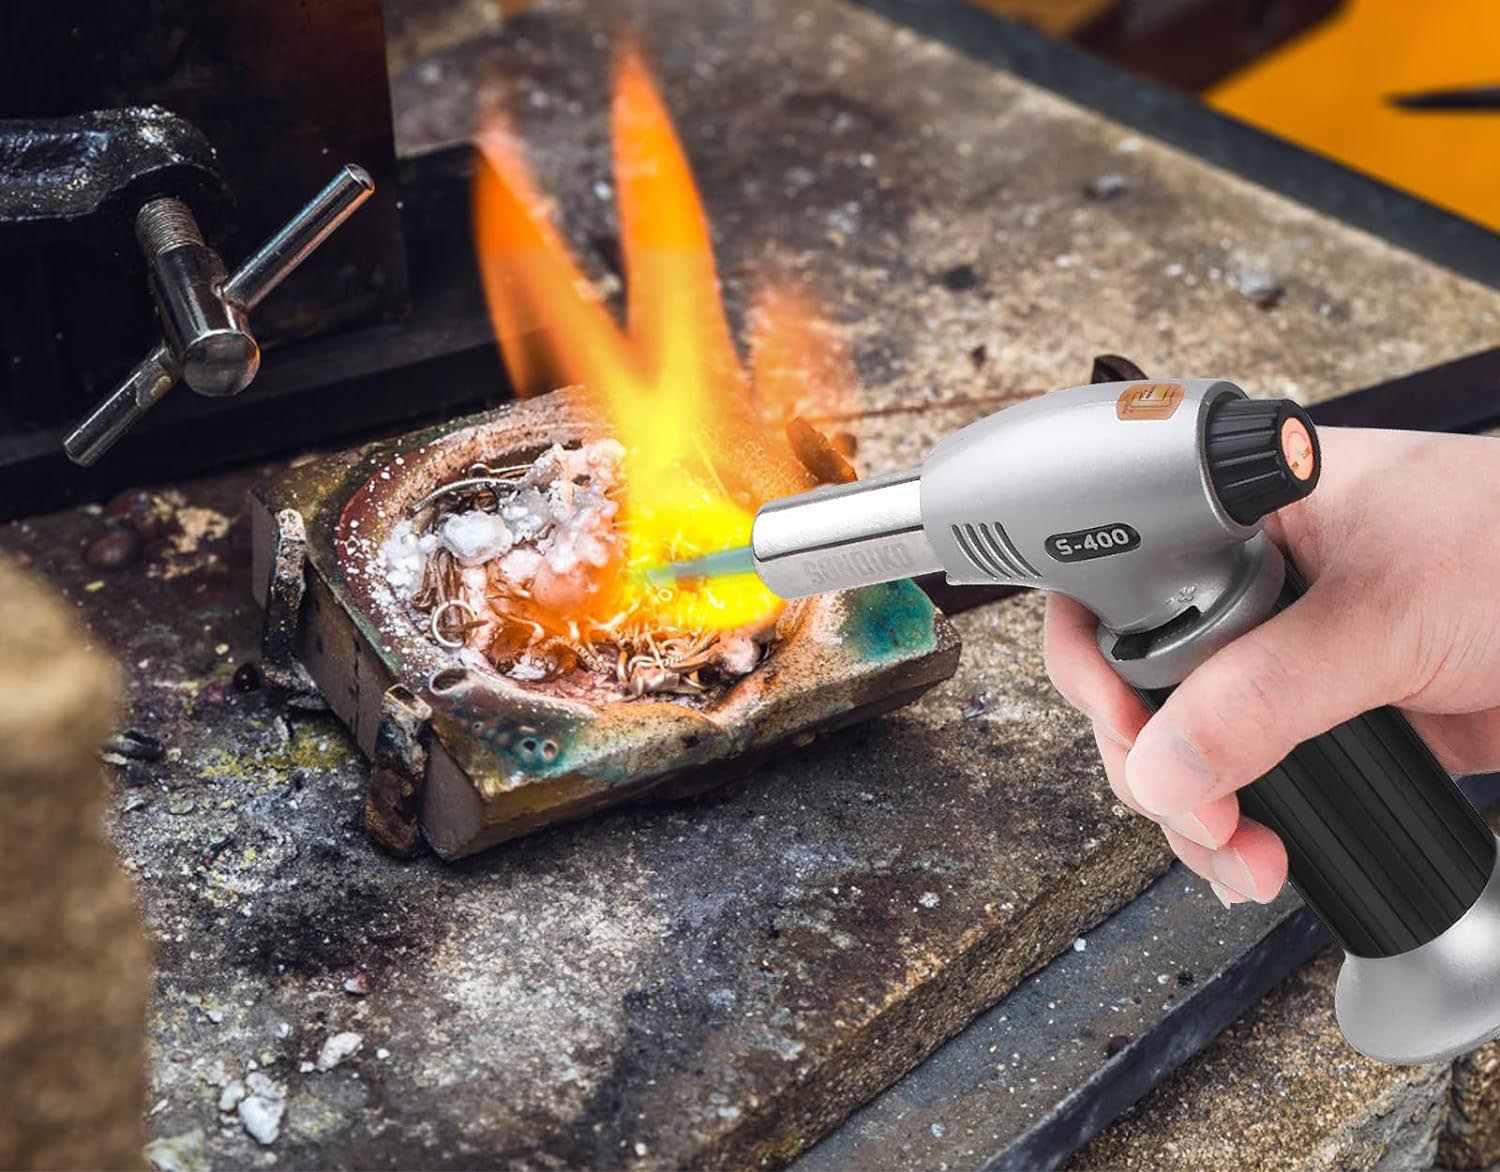 The Best Gifts for Anyone Who Owns a Solo Stove Option Sondiko Butane Torch